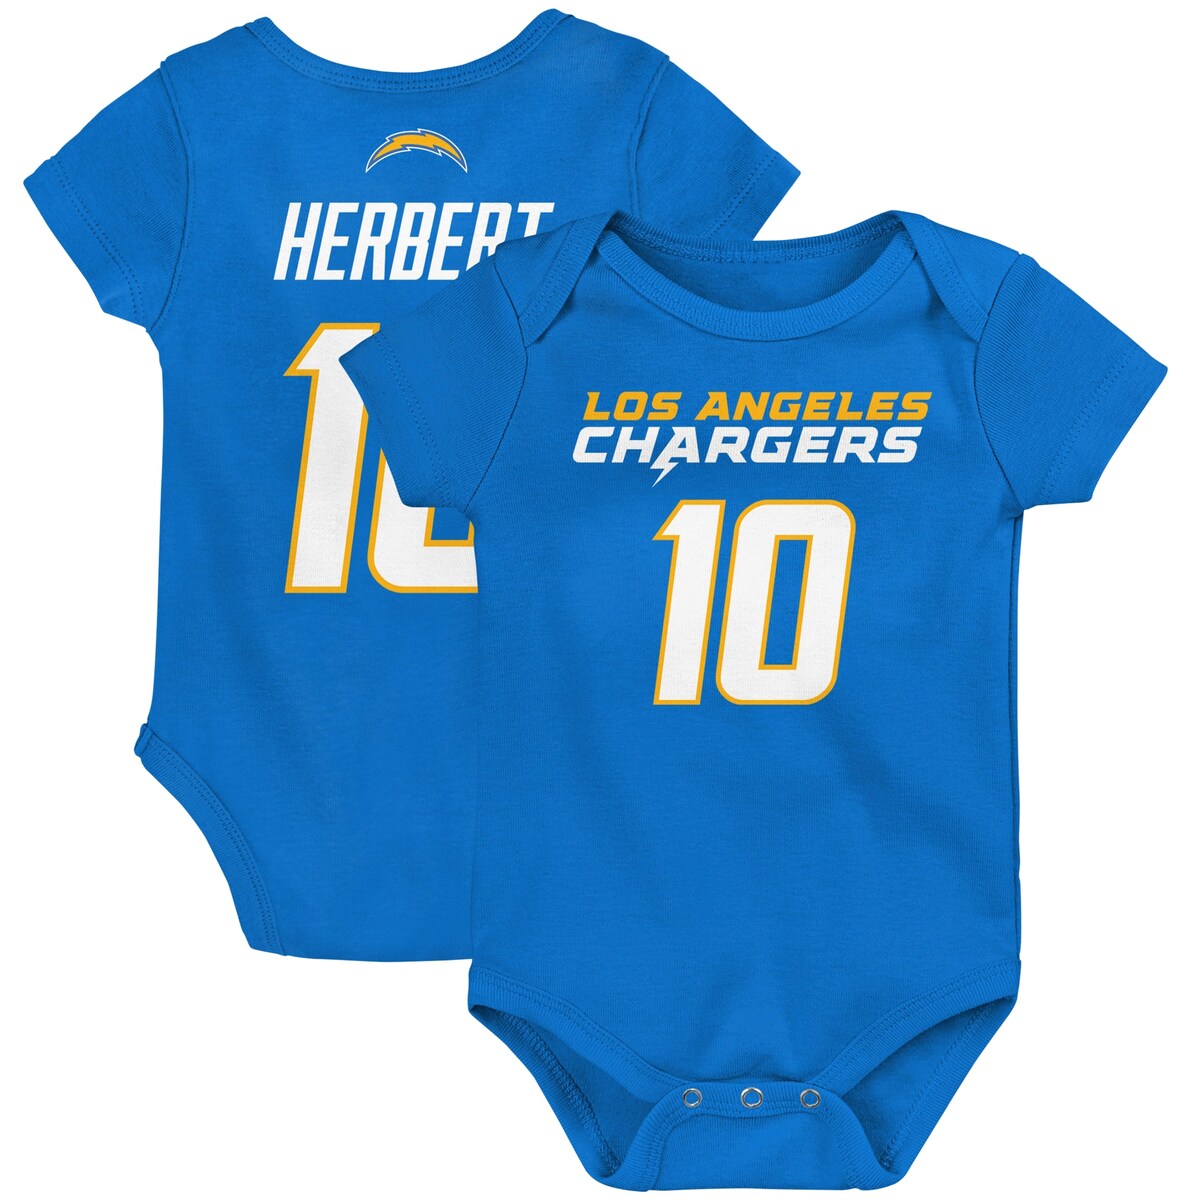 With your kiddo steadily growing as a football fan, help them showcase their strengthening pride with this Los Angeles Chargers Justin Herbert Mainliner Player Name and Number bodysuit. It features bold graphics and a snug, comfortable fit so they can easily and proudly show some love for the Los Angeles Chargers and one of their top players.Three-snap closure at bottomOfficially licensedLap shoulder necklineScreen print graphicsMachine wash, tumble dry lowImportedBrand: OuterstuffMaterial: 100% Cotton